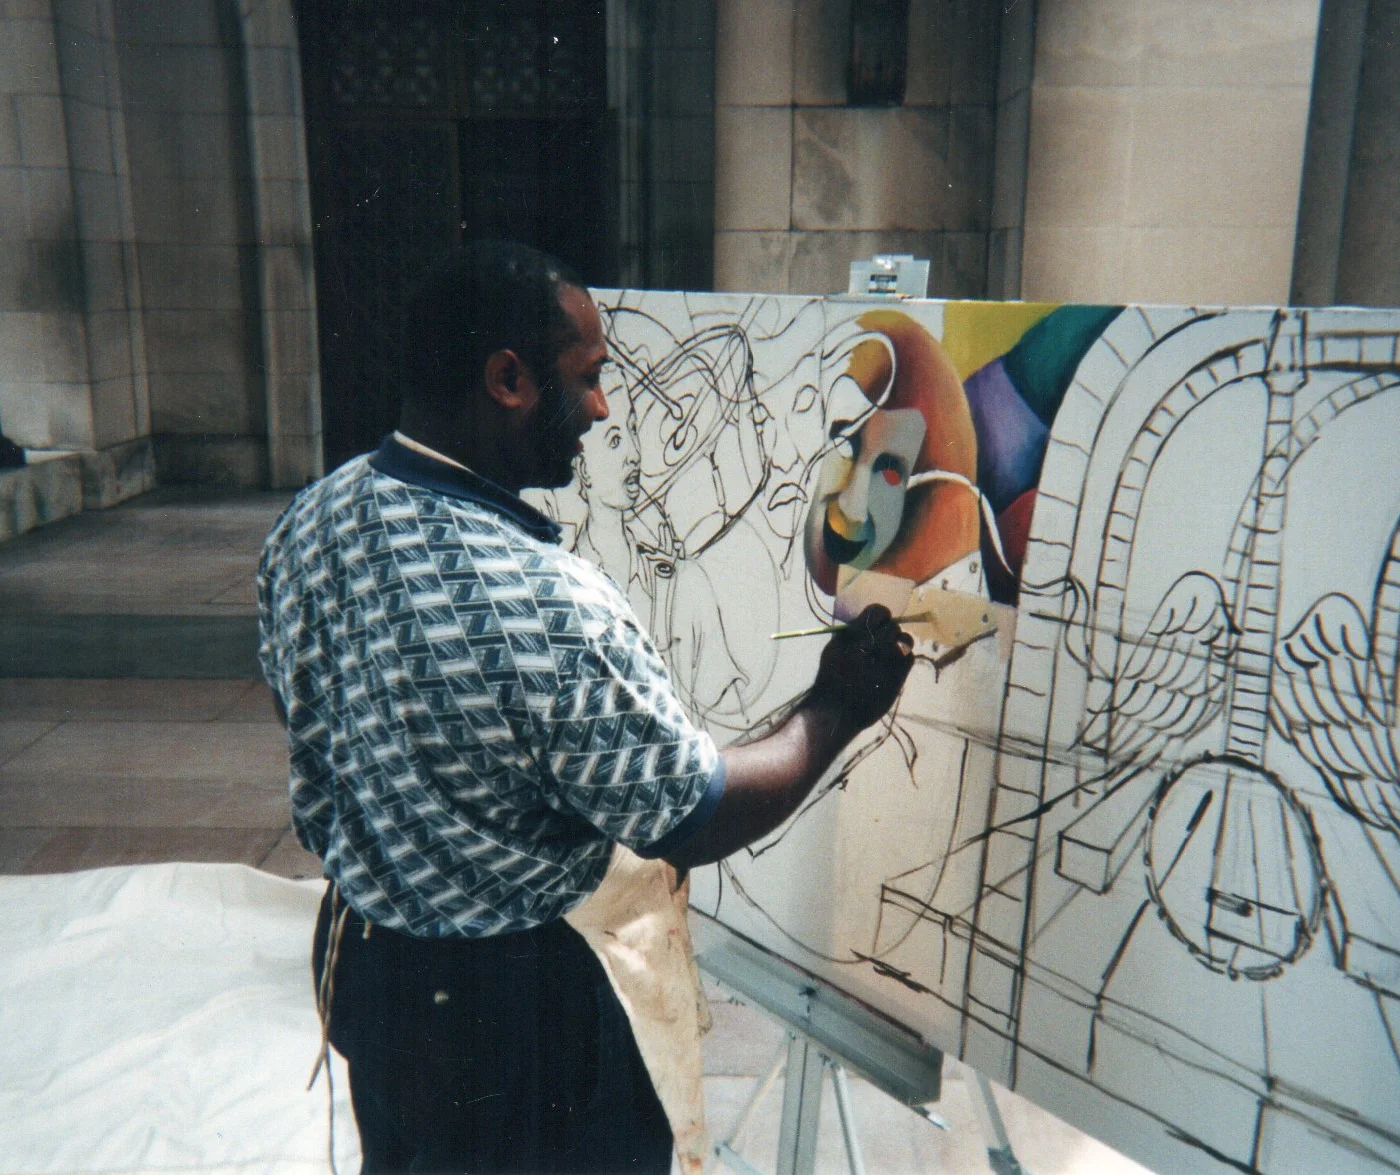 Michael McBride is an African American man. He is pictured here in a green and white patterned shirt, facing away from the camera, working on a painting.